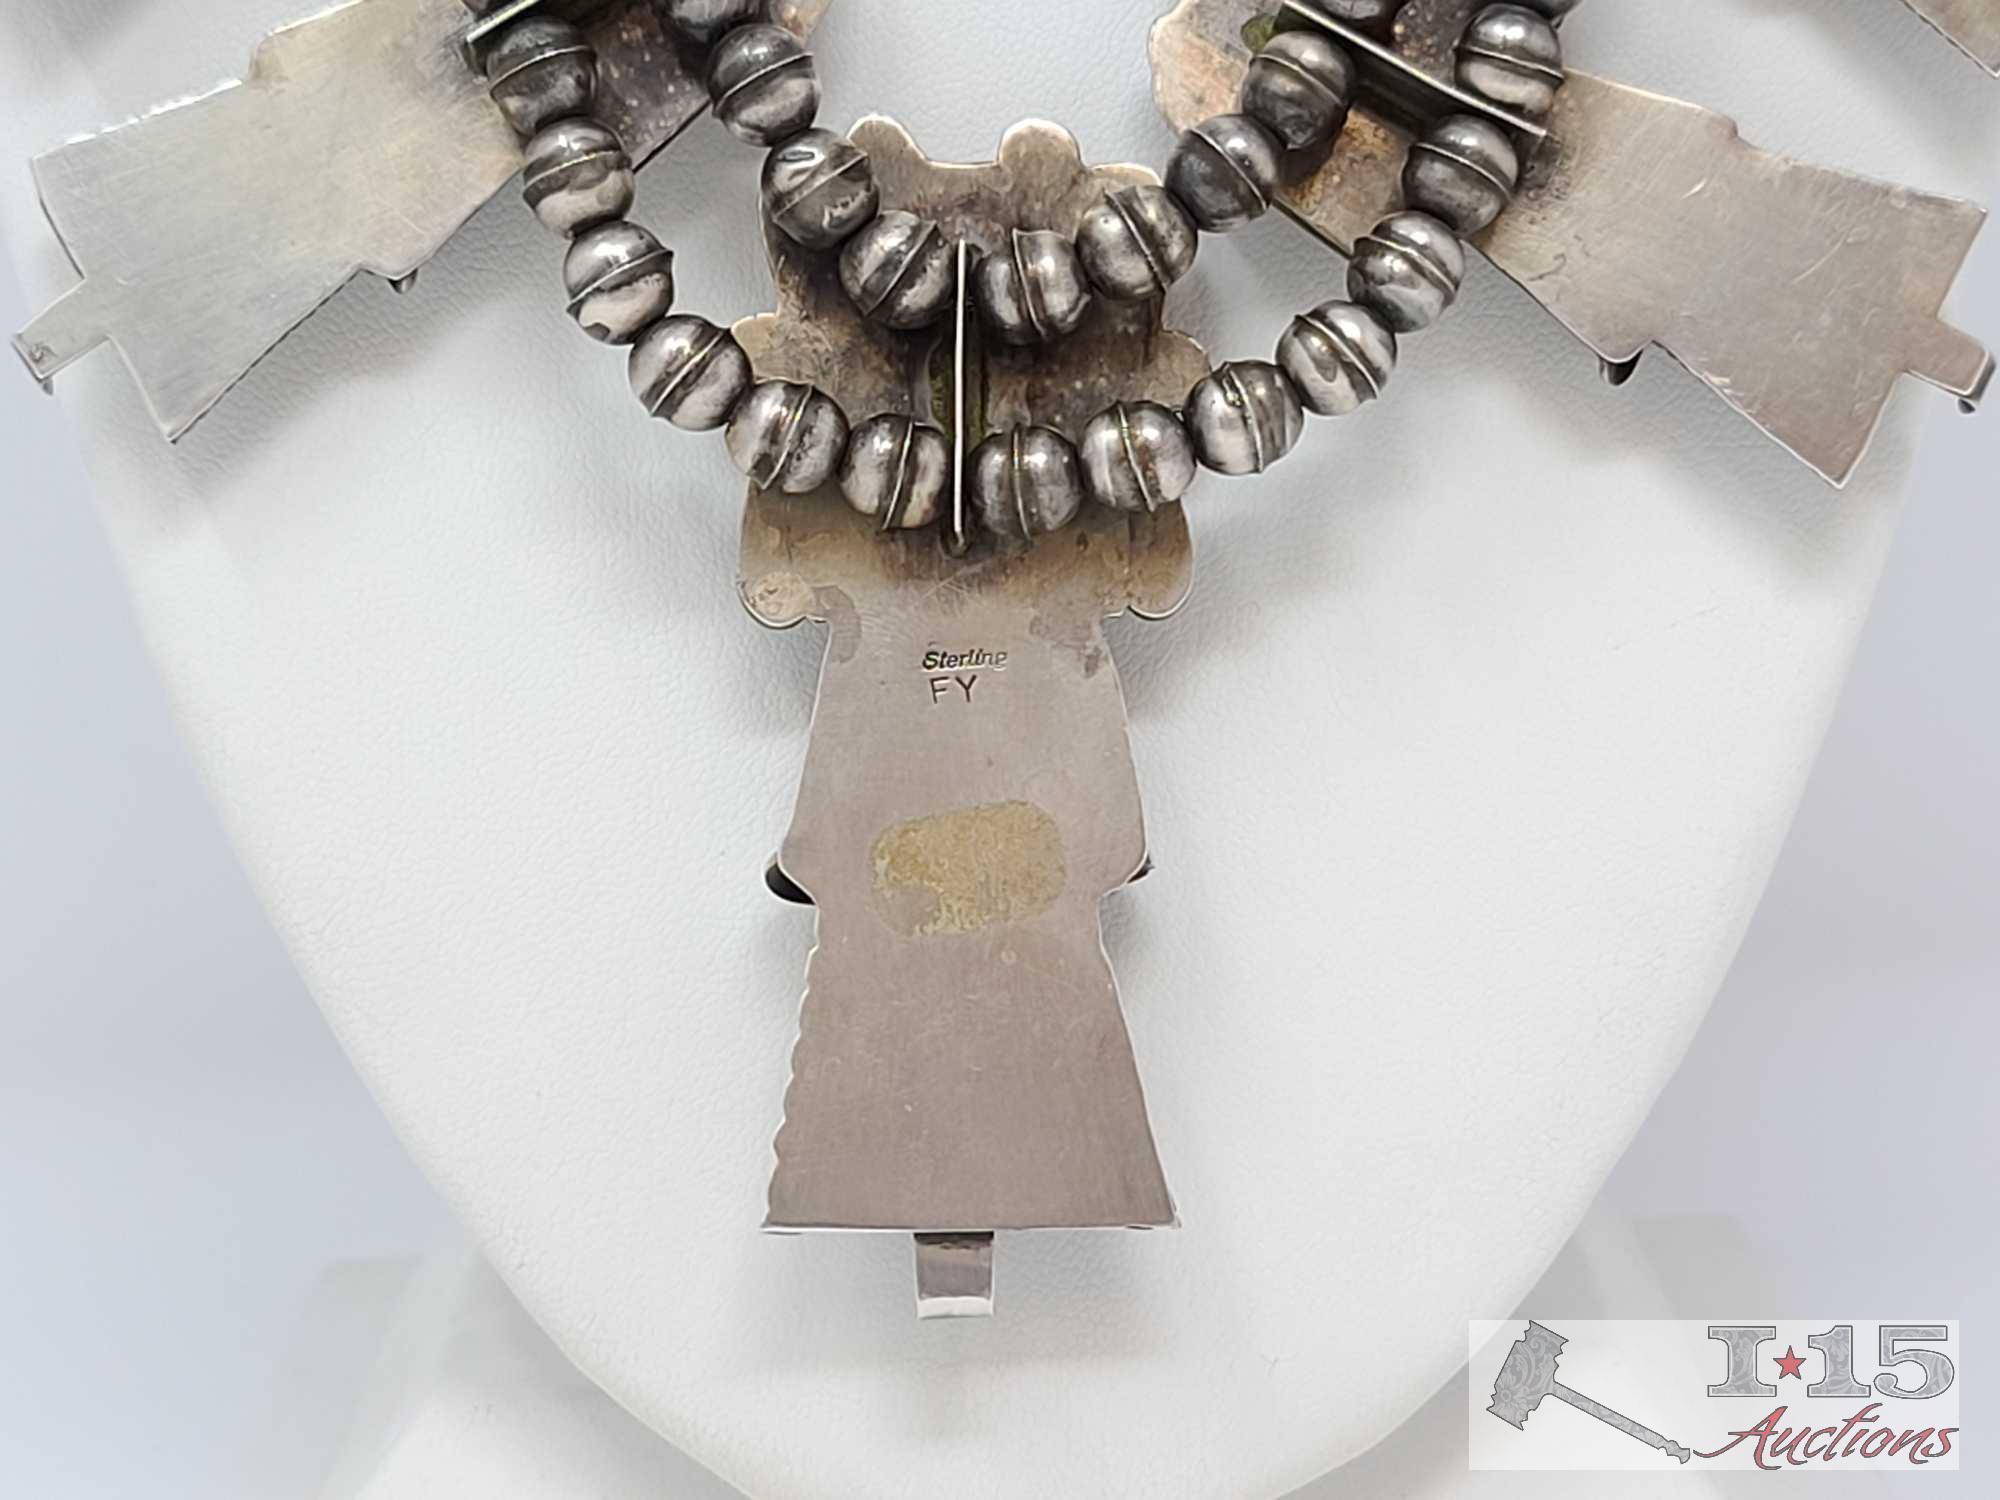 NAVAJO CORN MAIDEN KACHINA SQUASH BLOSSOM NECKLACE "F.Y." STERLING CORAL-NR